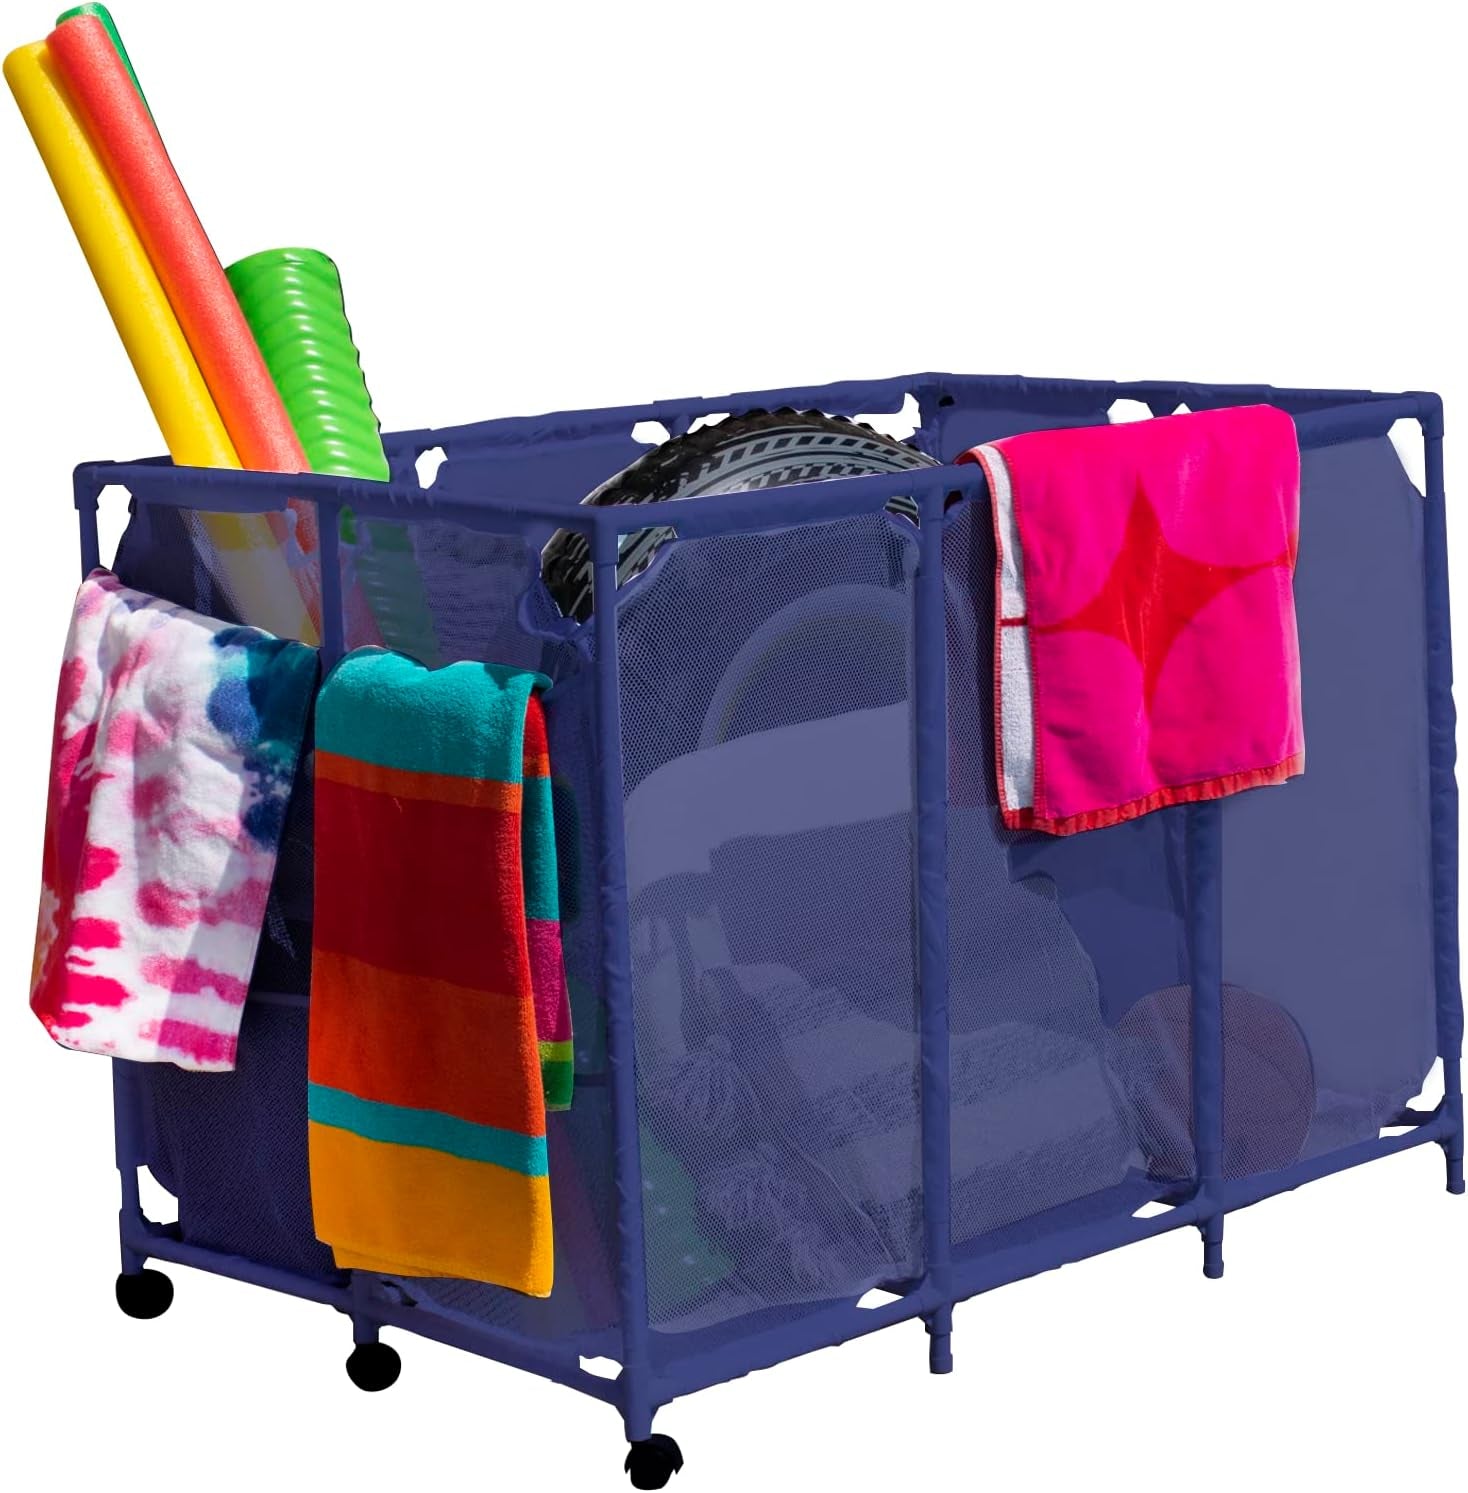 Pool Noodles Holder, Toys, Floats, Balls and Floats Equipment Mesh Rolling Storage Organizer Bin, Extra-Large, (47.2" W X 30.2" L X 34" H), Blue/White Style 455119